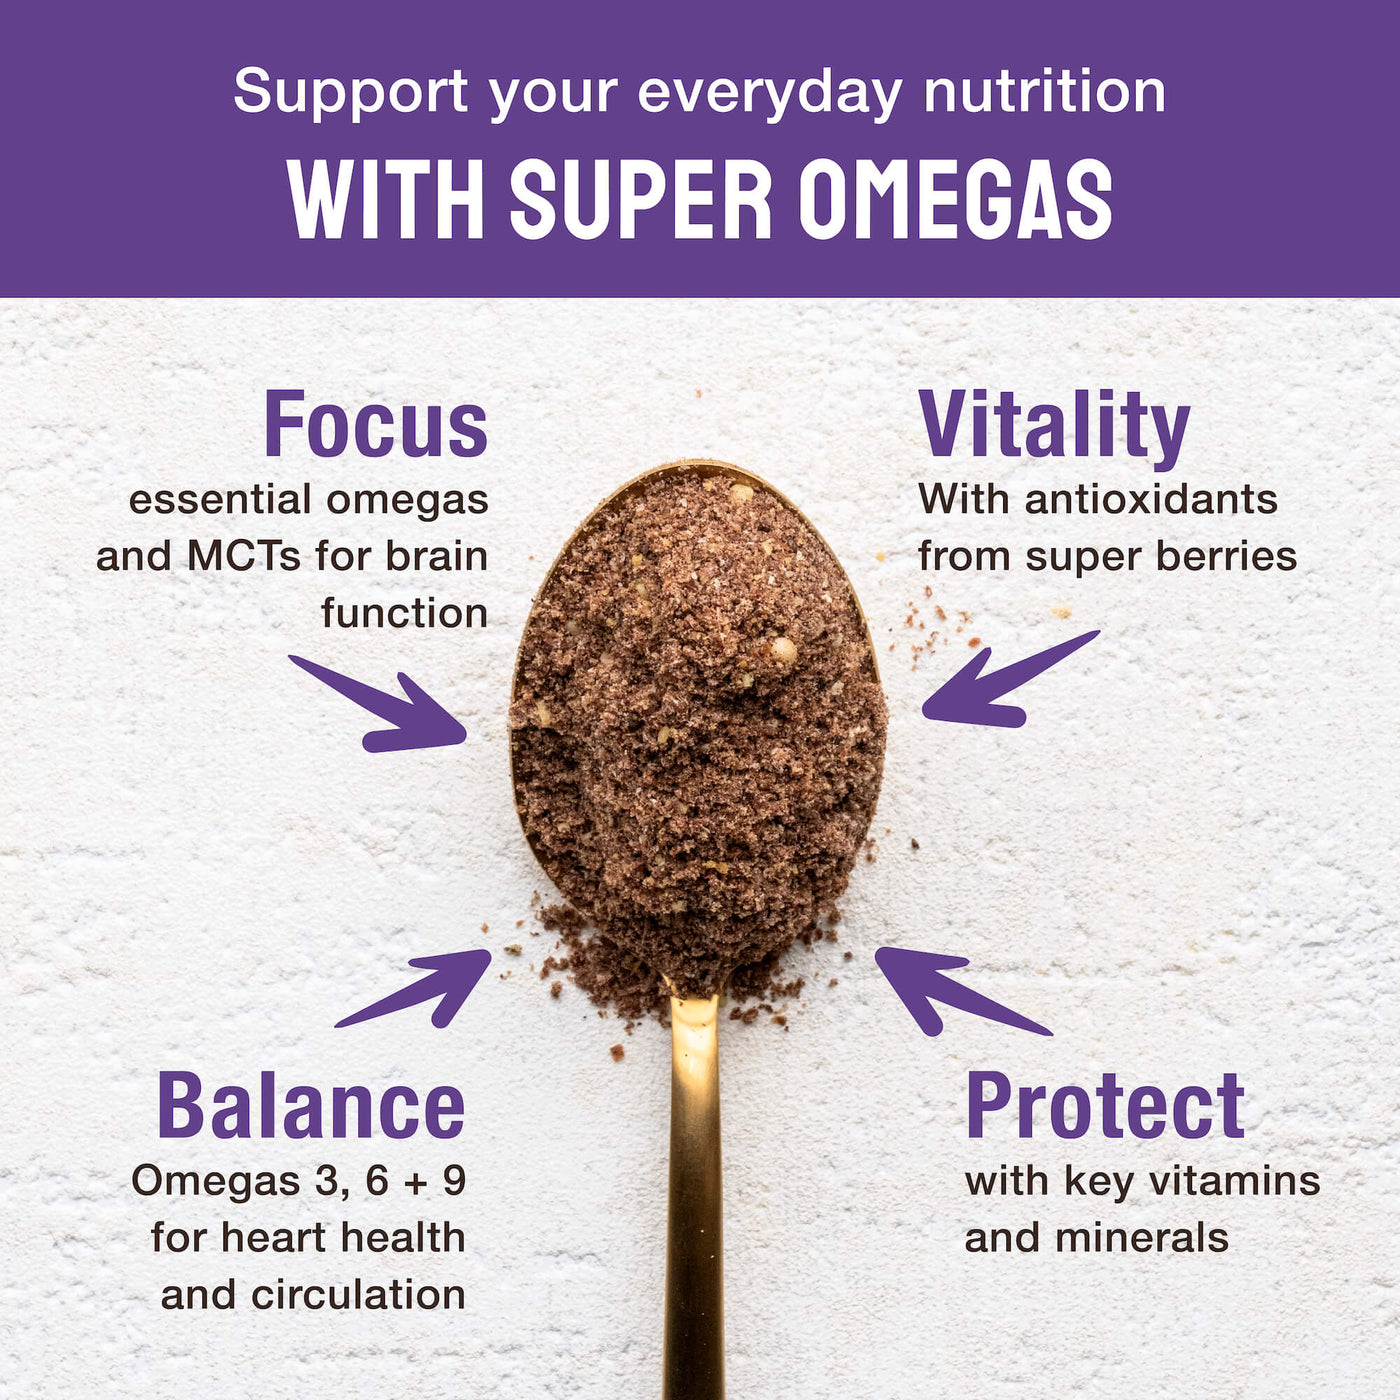 BodyMe organic vegan omegas superfood powder with flaxseed, chia seeds, hemp seeds, blueberry, coconut and acai berry